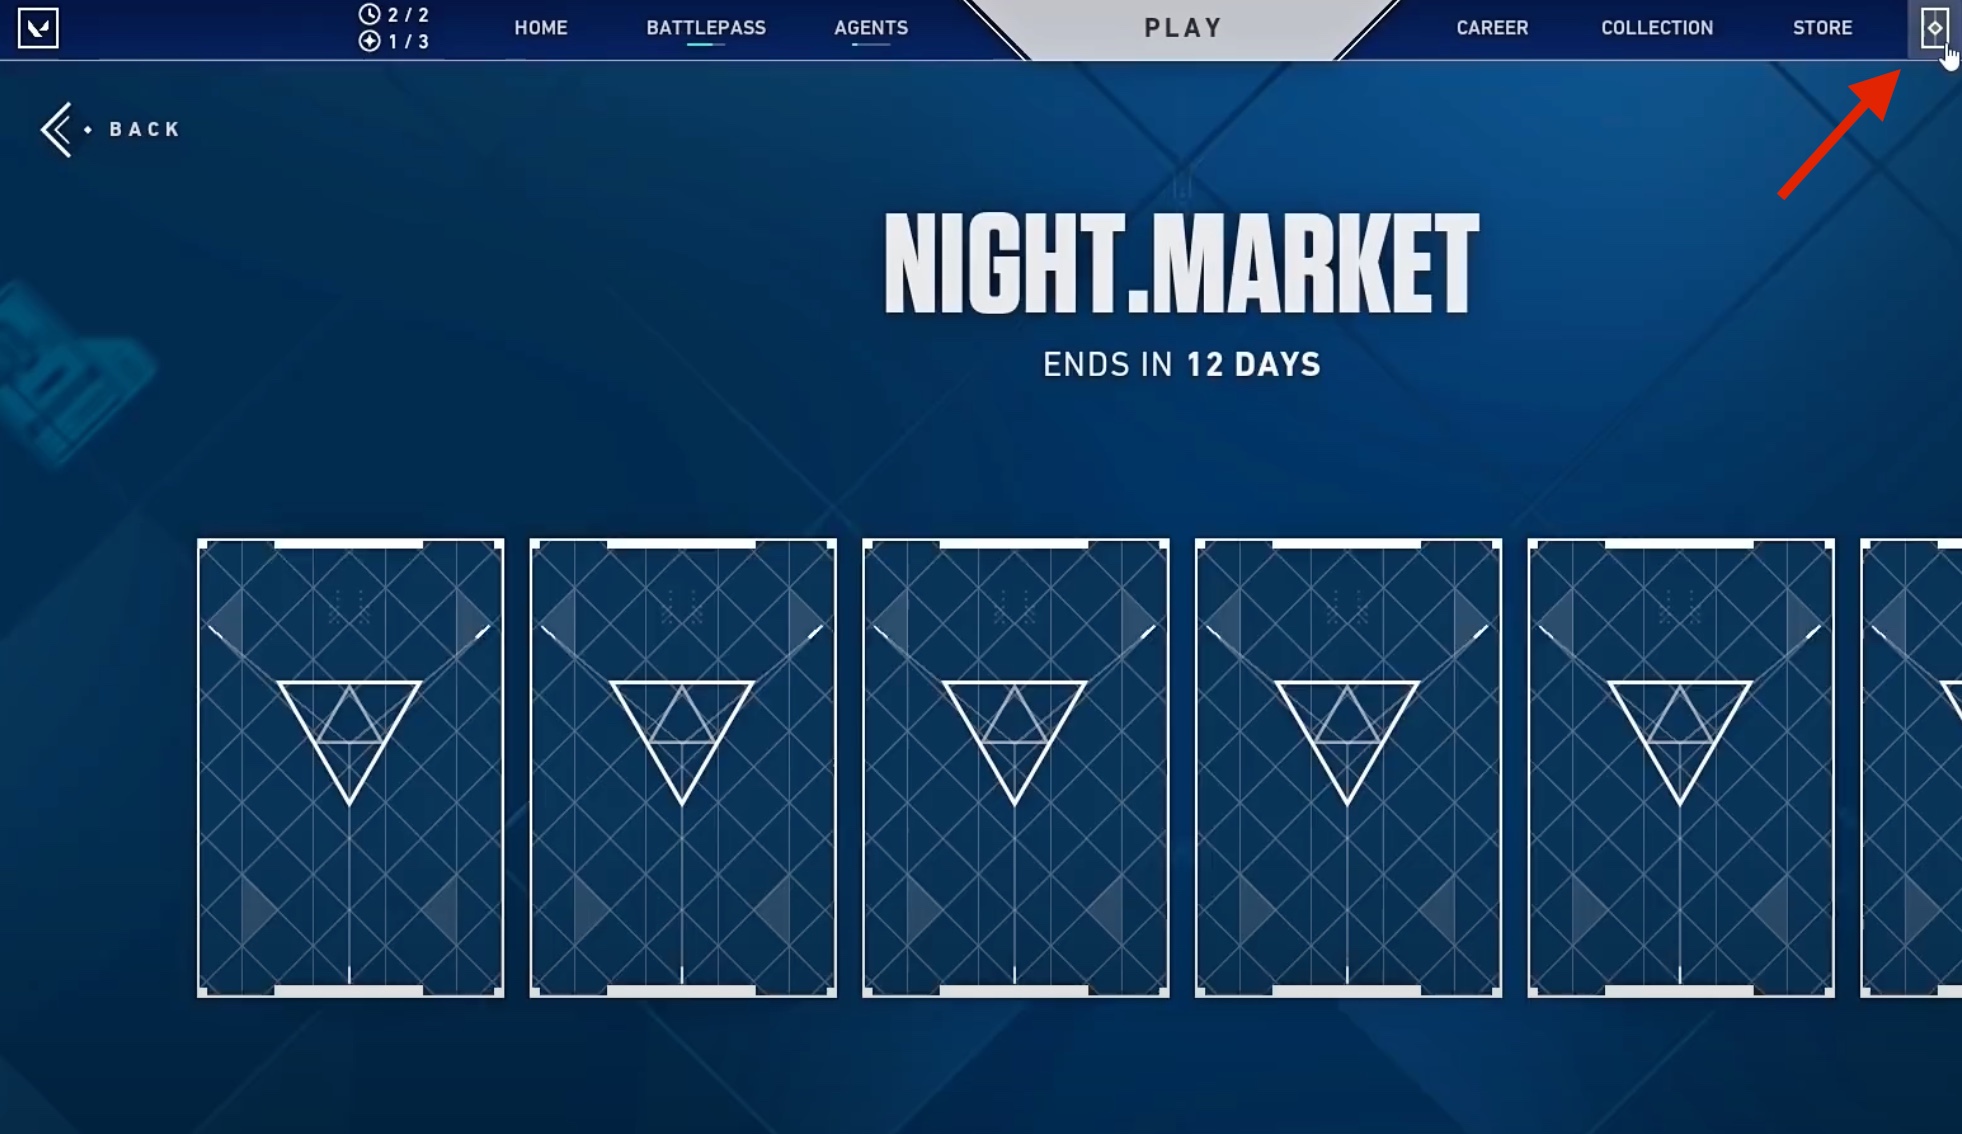 How does the Night.Market work in VALORANT? Dot Esports